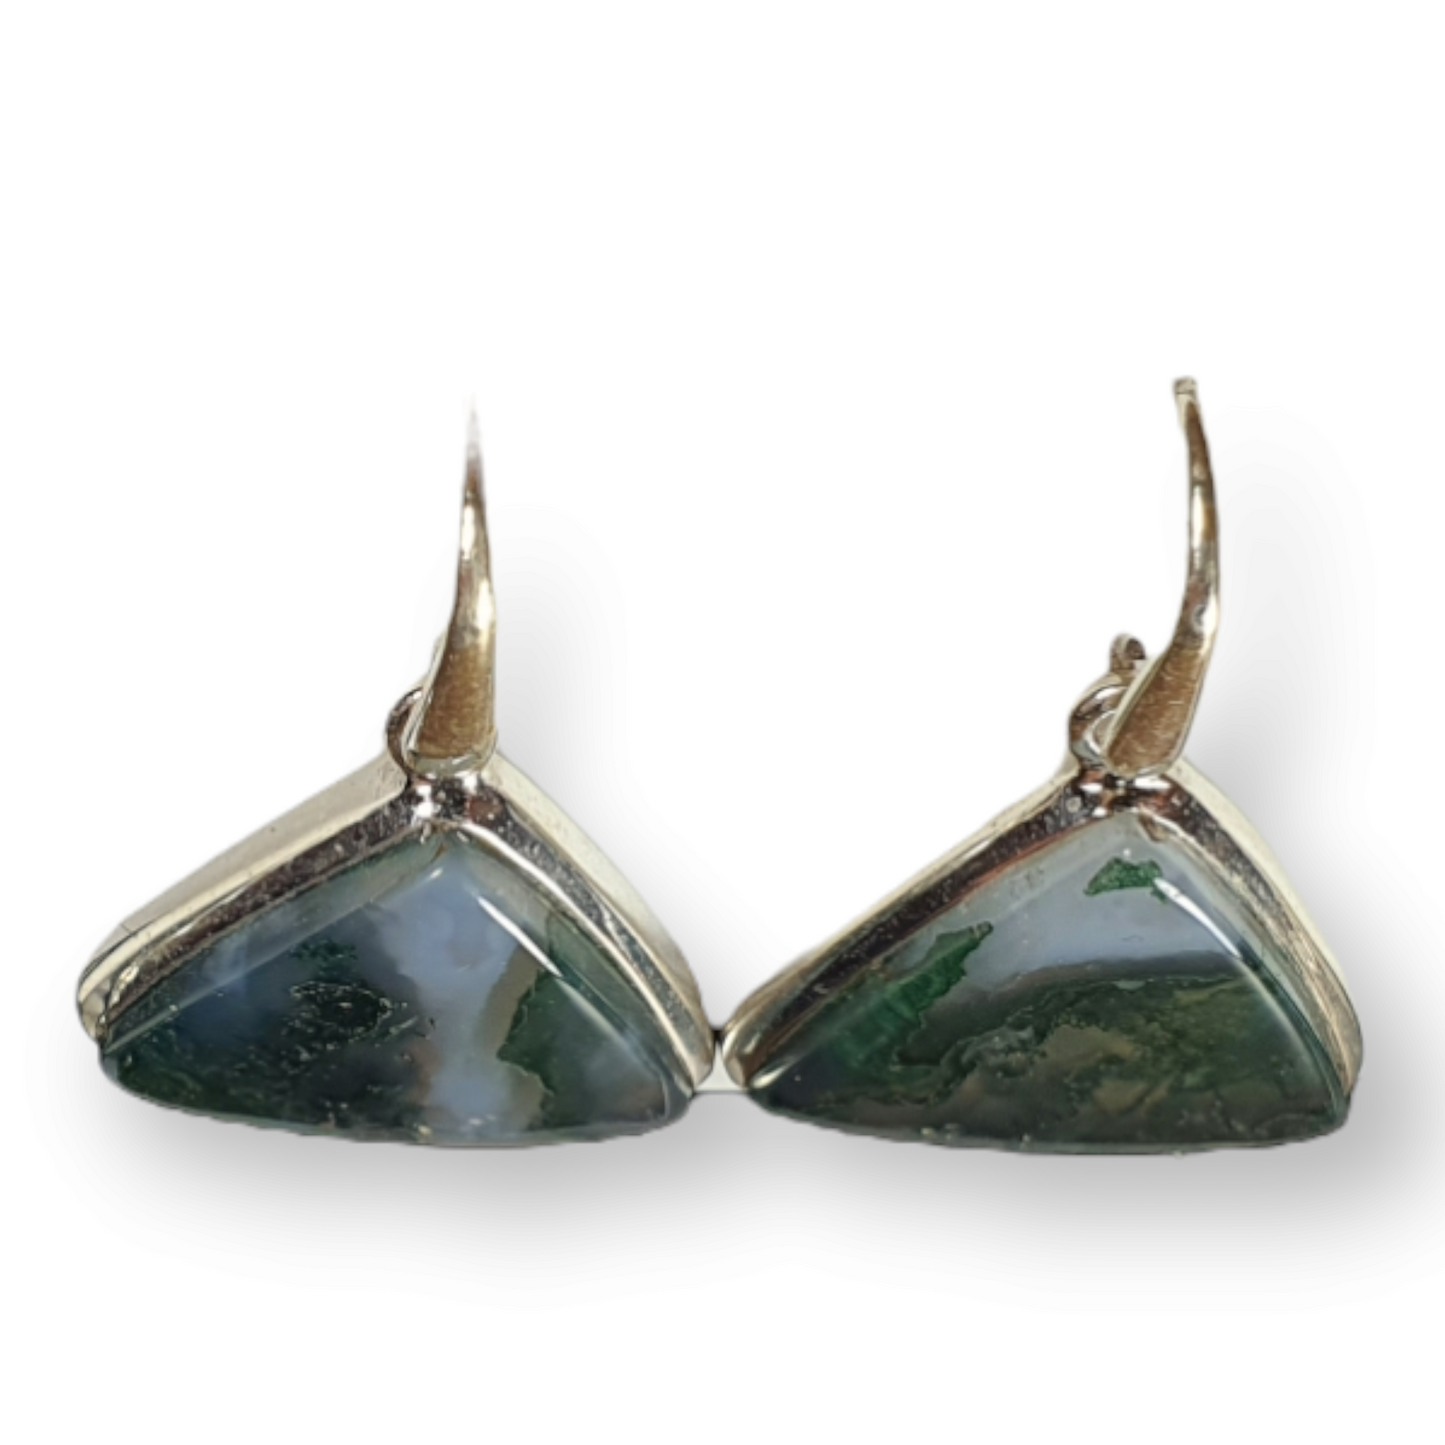 Crystals - Moss Agate Cabochon Hook/Drop Earrings - Sterling Silver